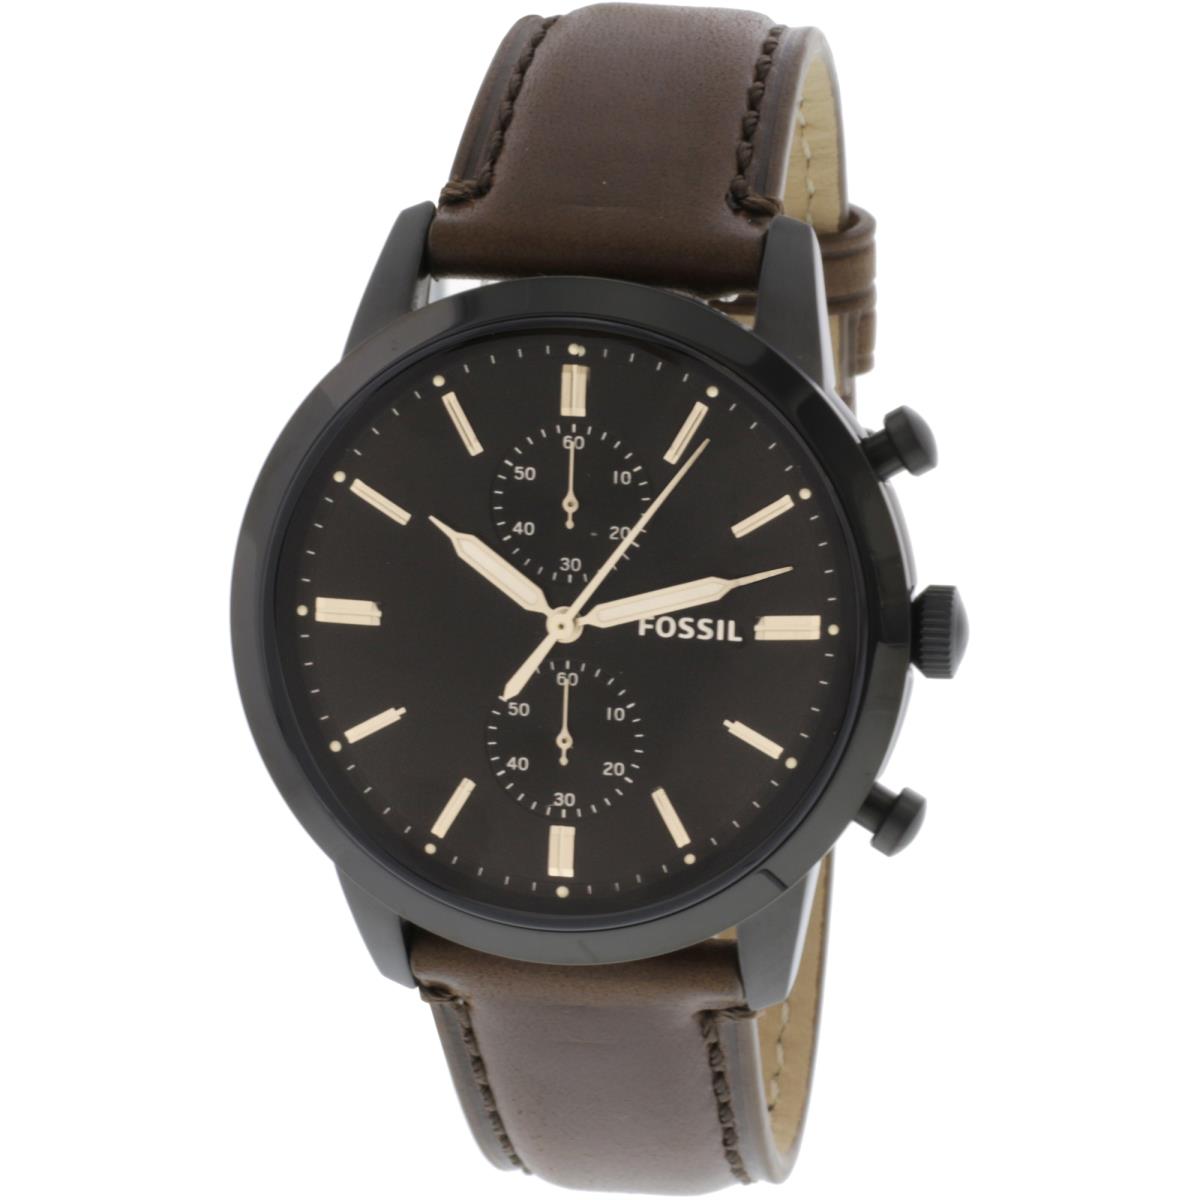 Fossil Townsman FS5437 Elegant Japanese Movement Chronograph Brown Leather Watch